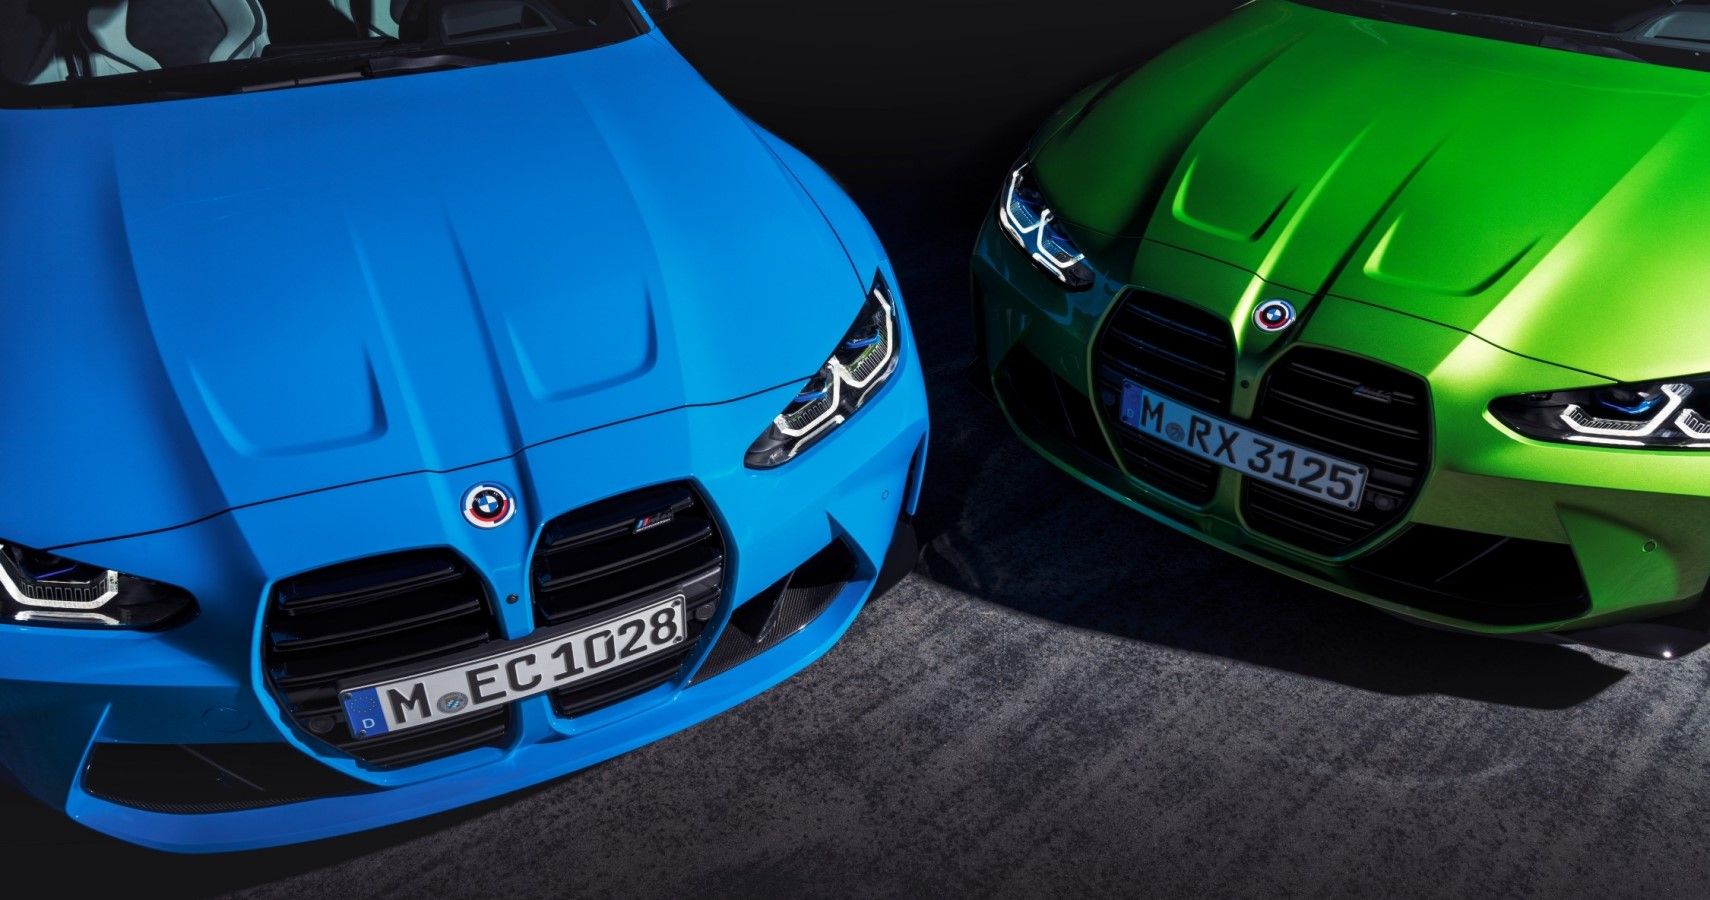 BMW M3 and M4 flaunting the 50th anniversary logo